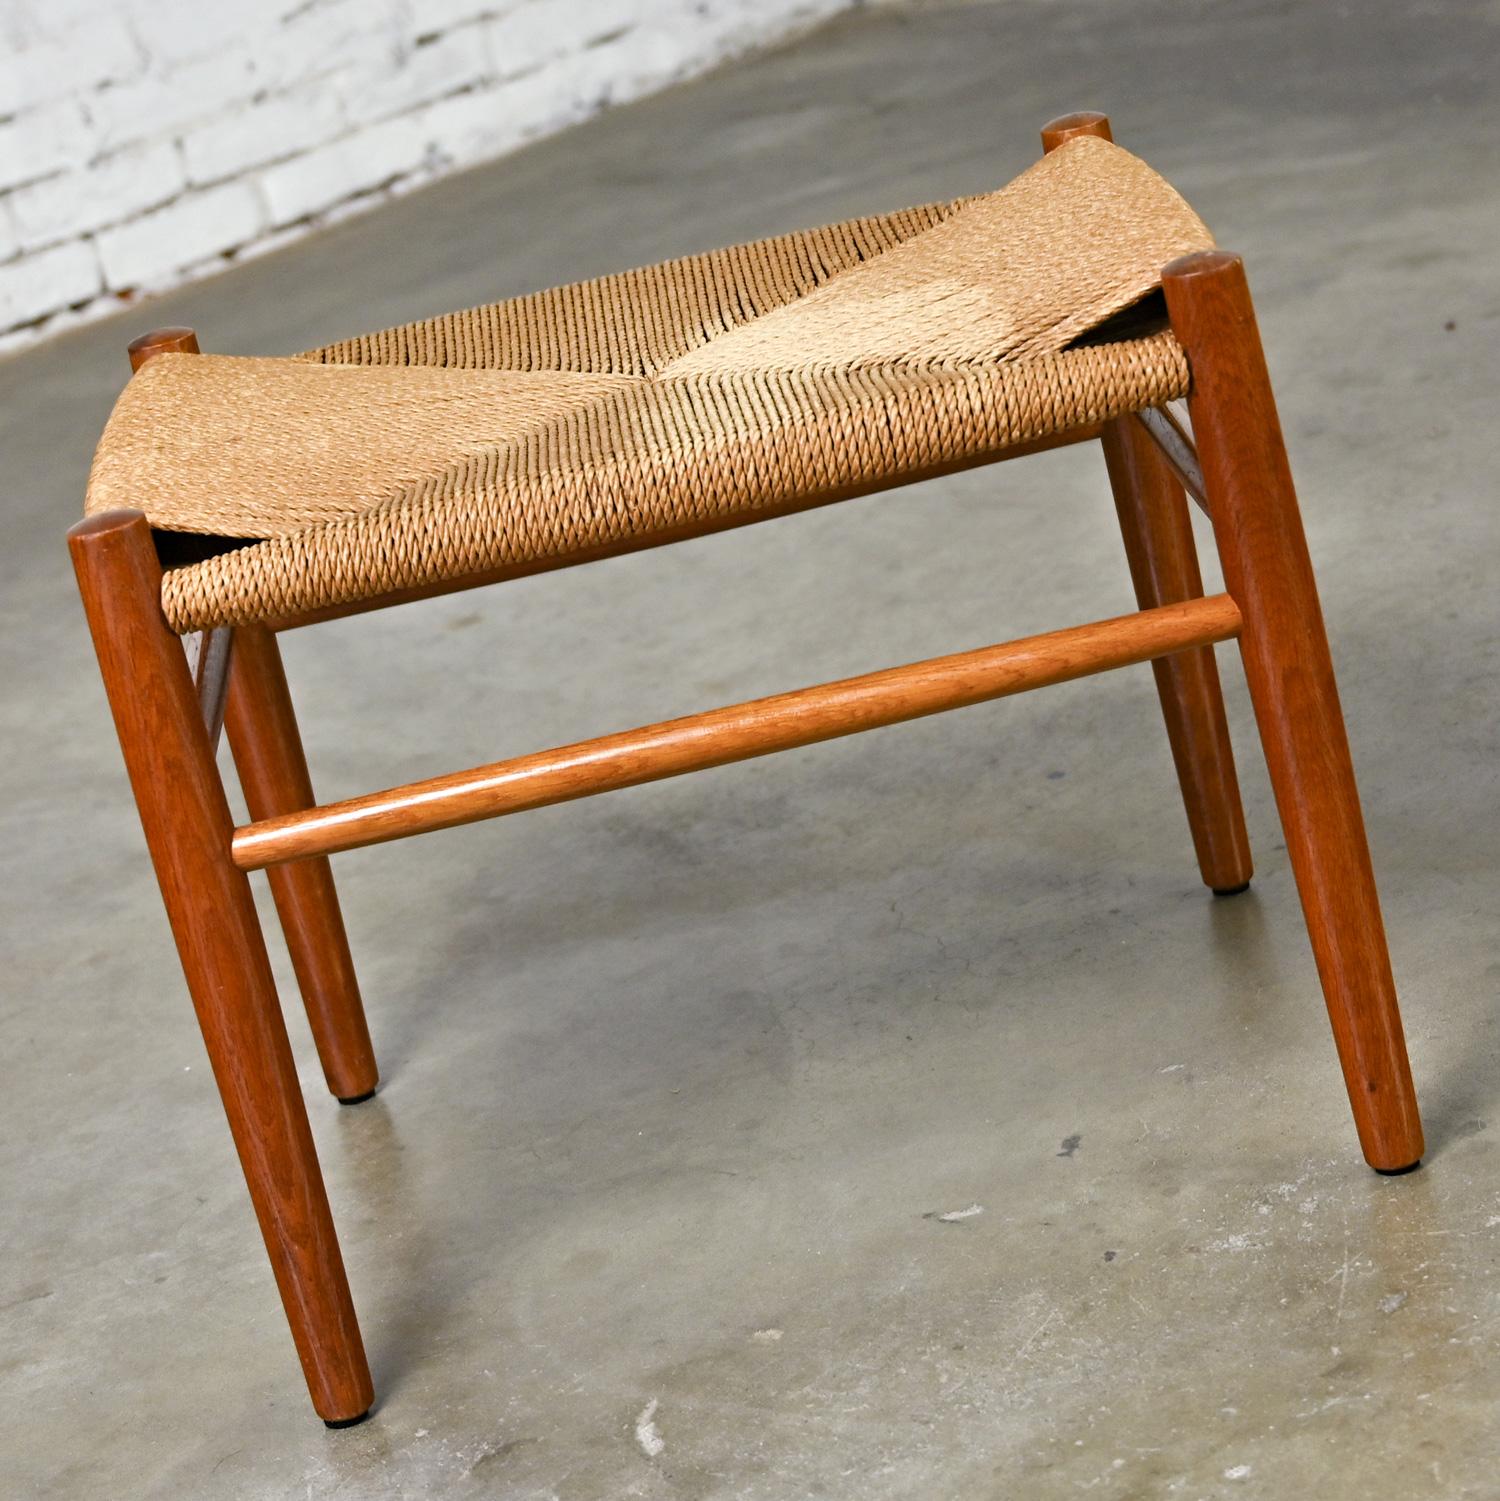 Mid-20th Century Scandinavian Modern Low Stool Teak with Natural Paper Cord Seat 4